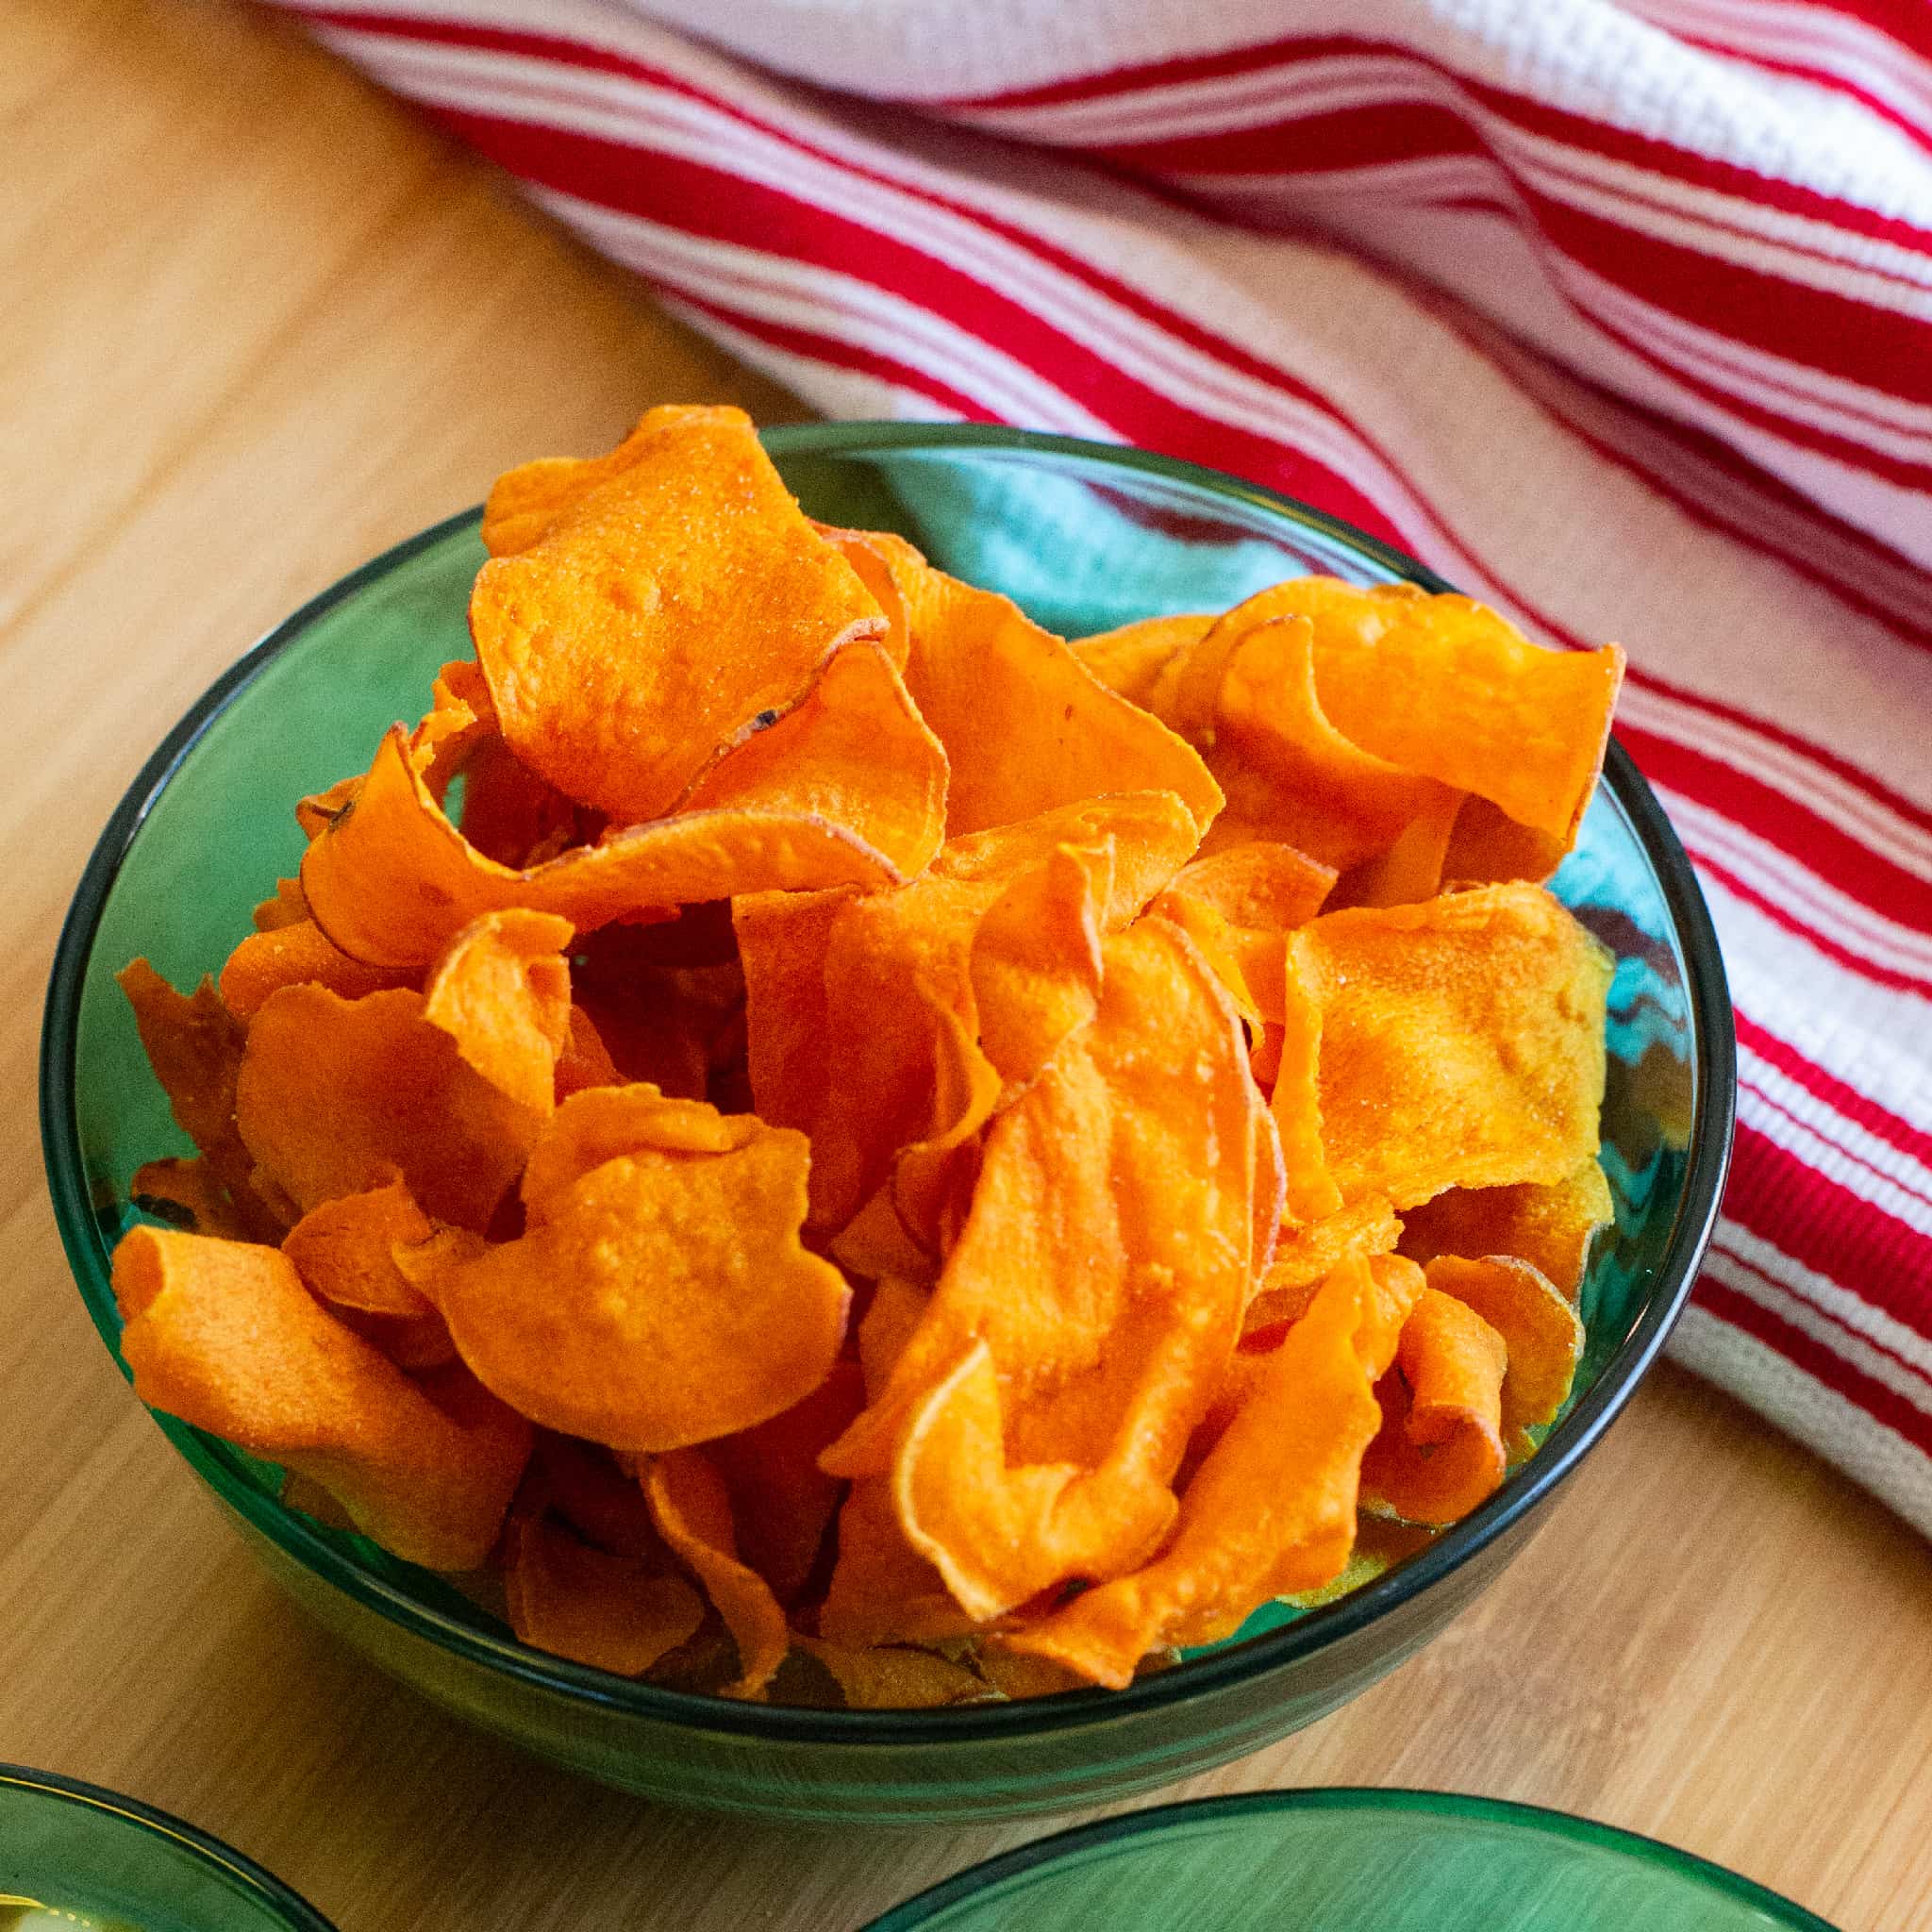 Jackson's Sea Salt Sweet Potato Chips with Avocado Oil - Buy or Subscribe